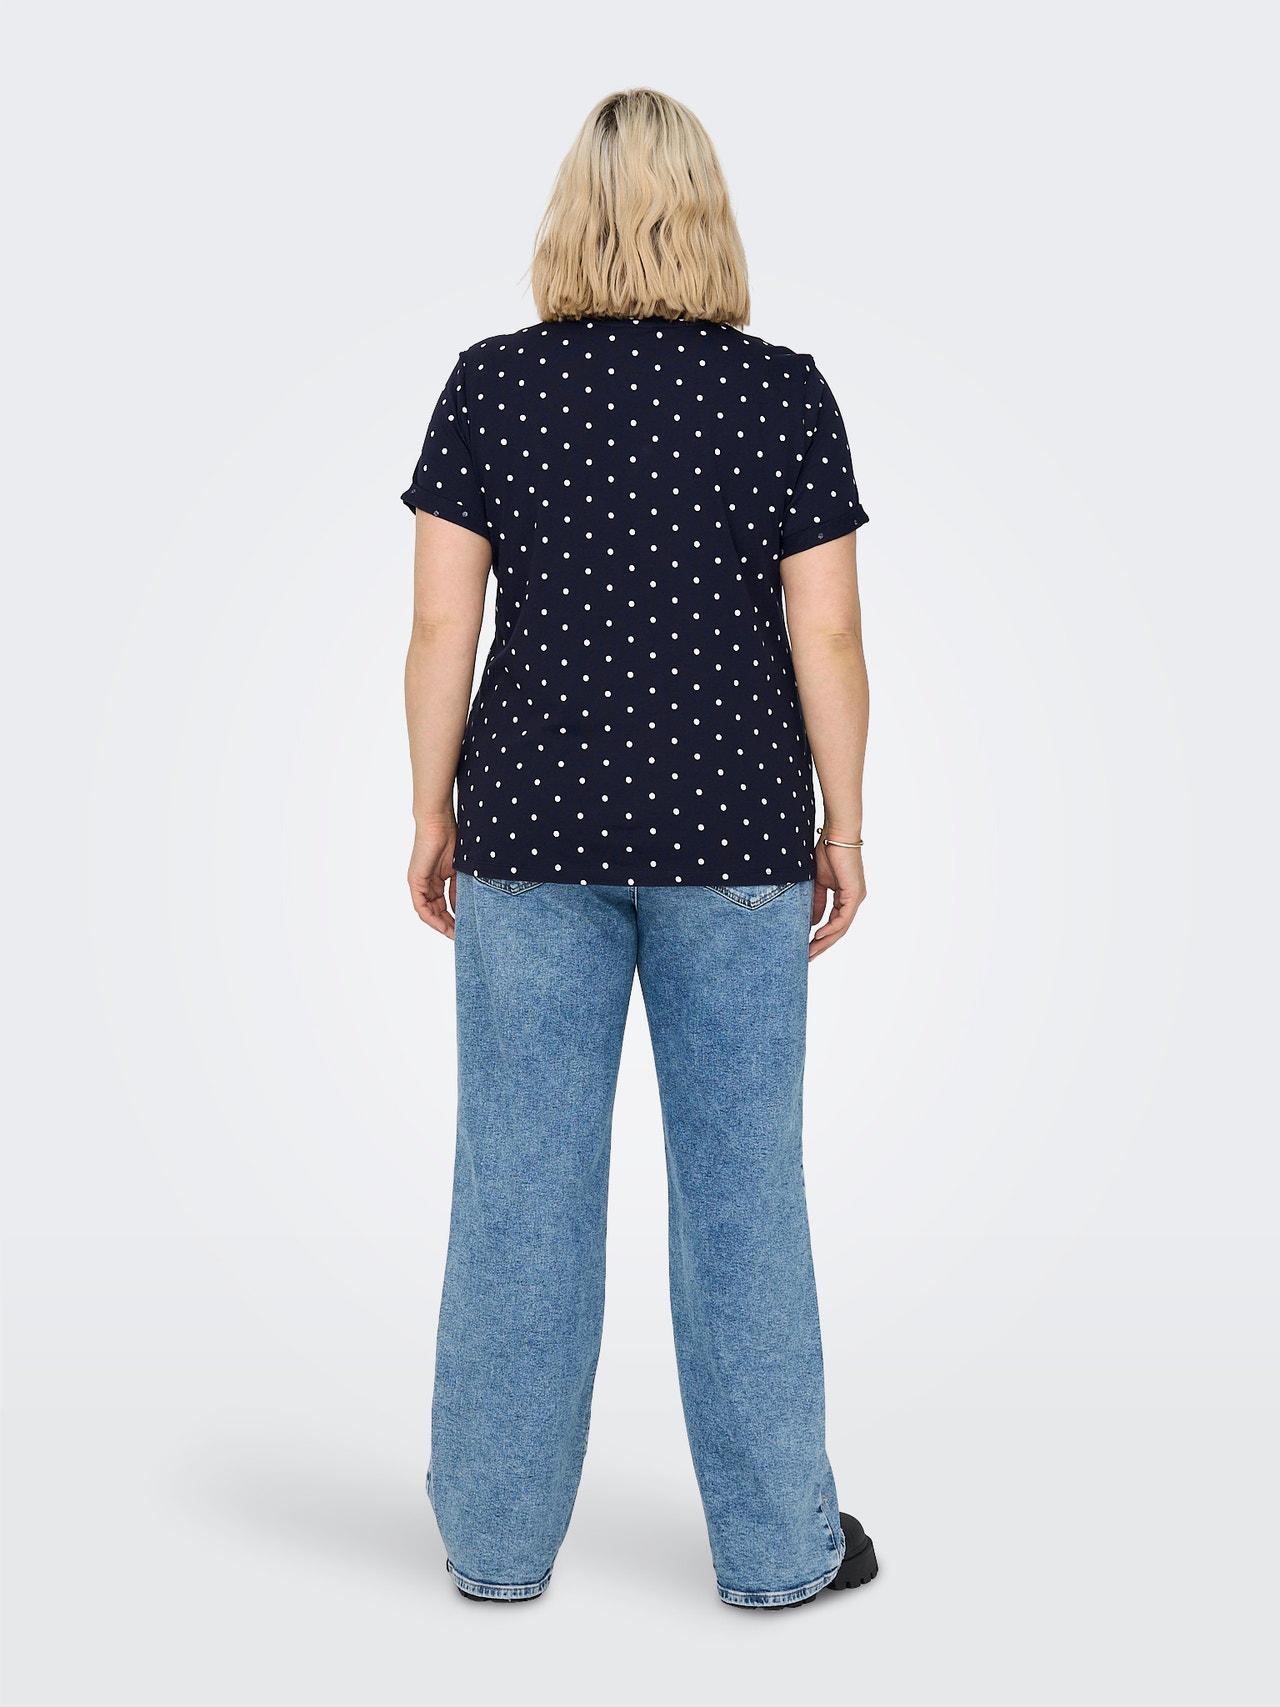 ONLY Curvy dotted t-shirt -Night Sky - 15290406